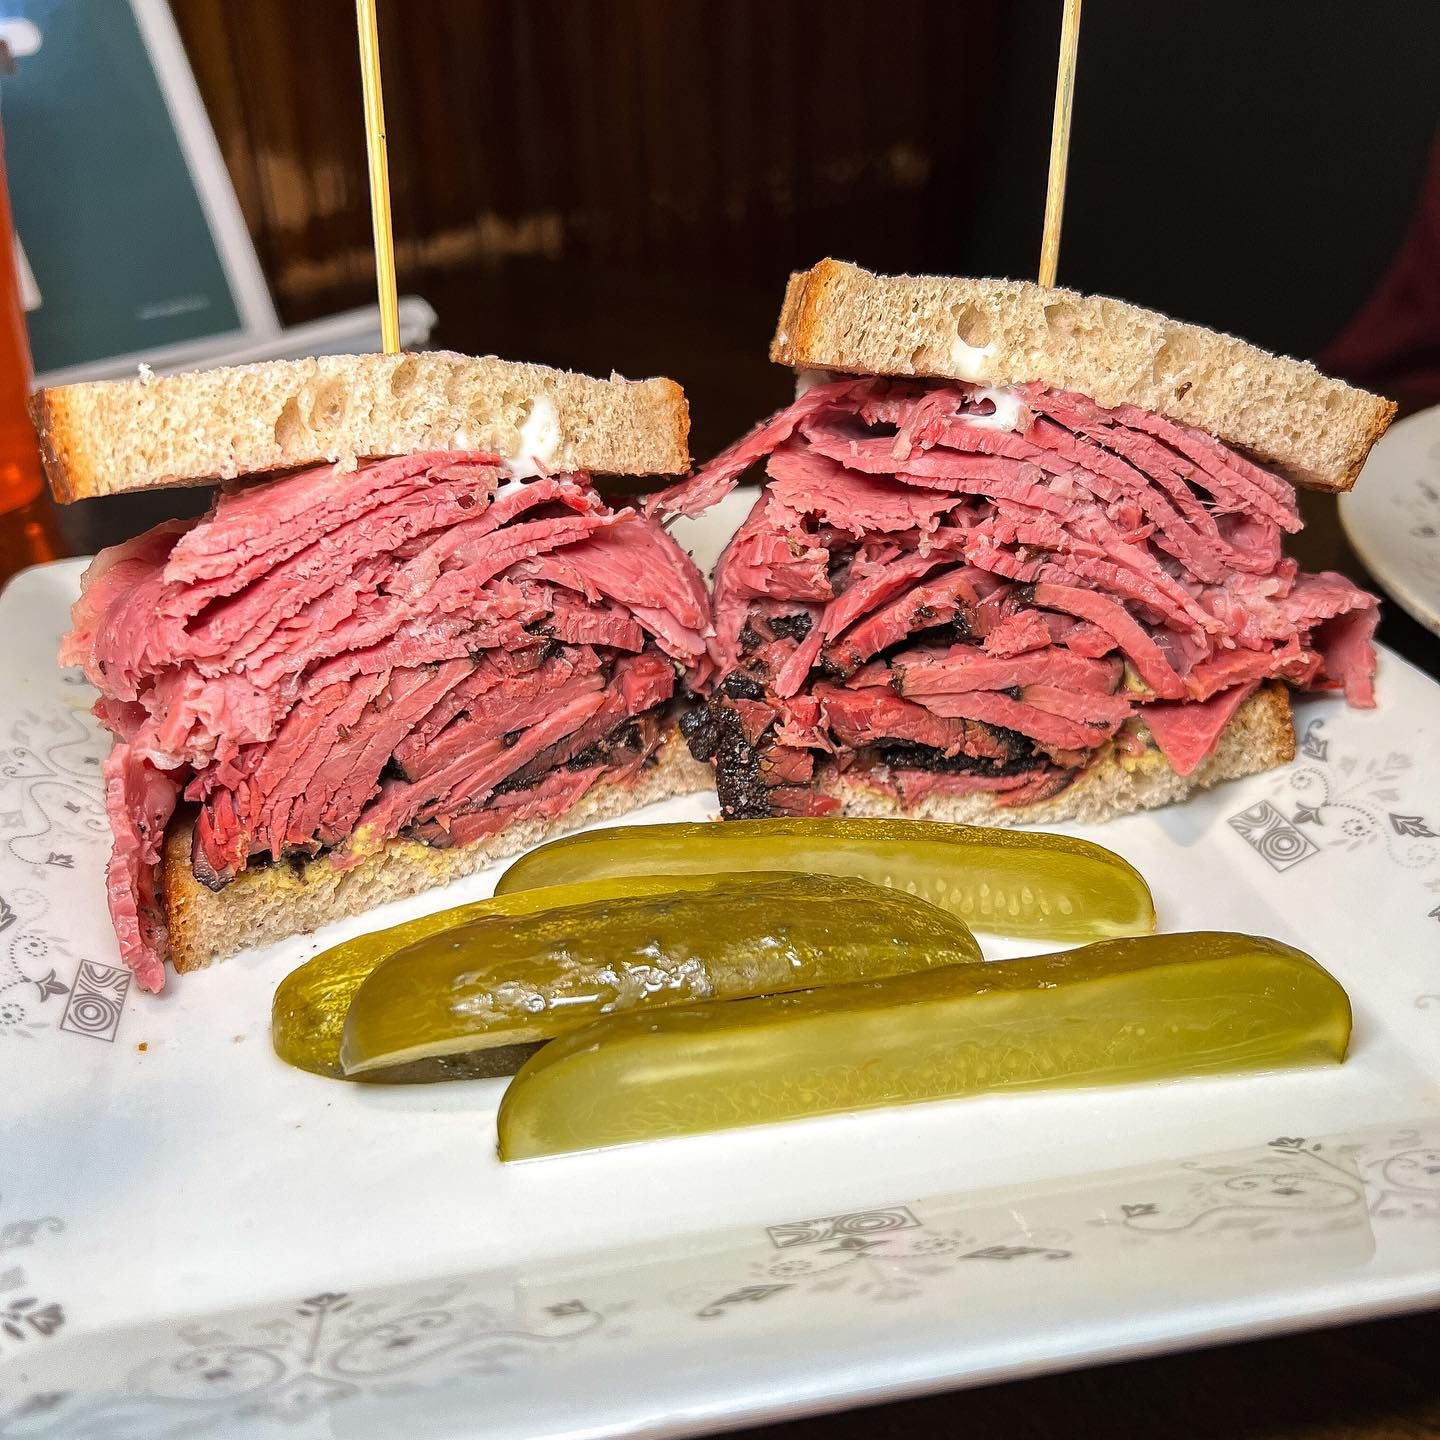 This pastrami on rye is a mainstay of David's Brisket House, a Yemeni-owned Brooklyn deli that makes sandwiches with halal meat.